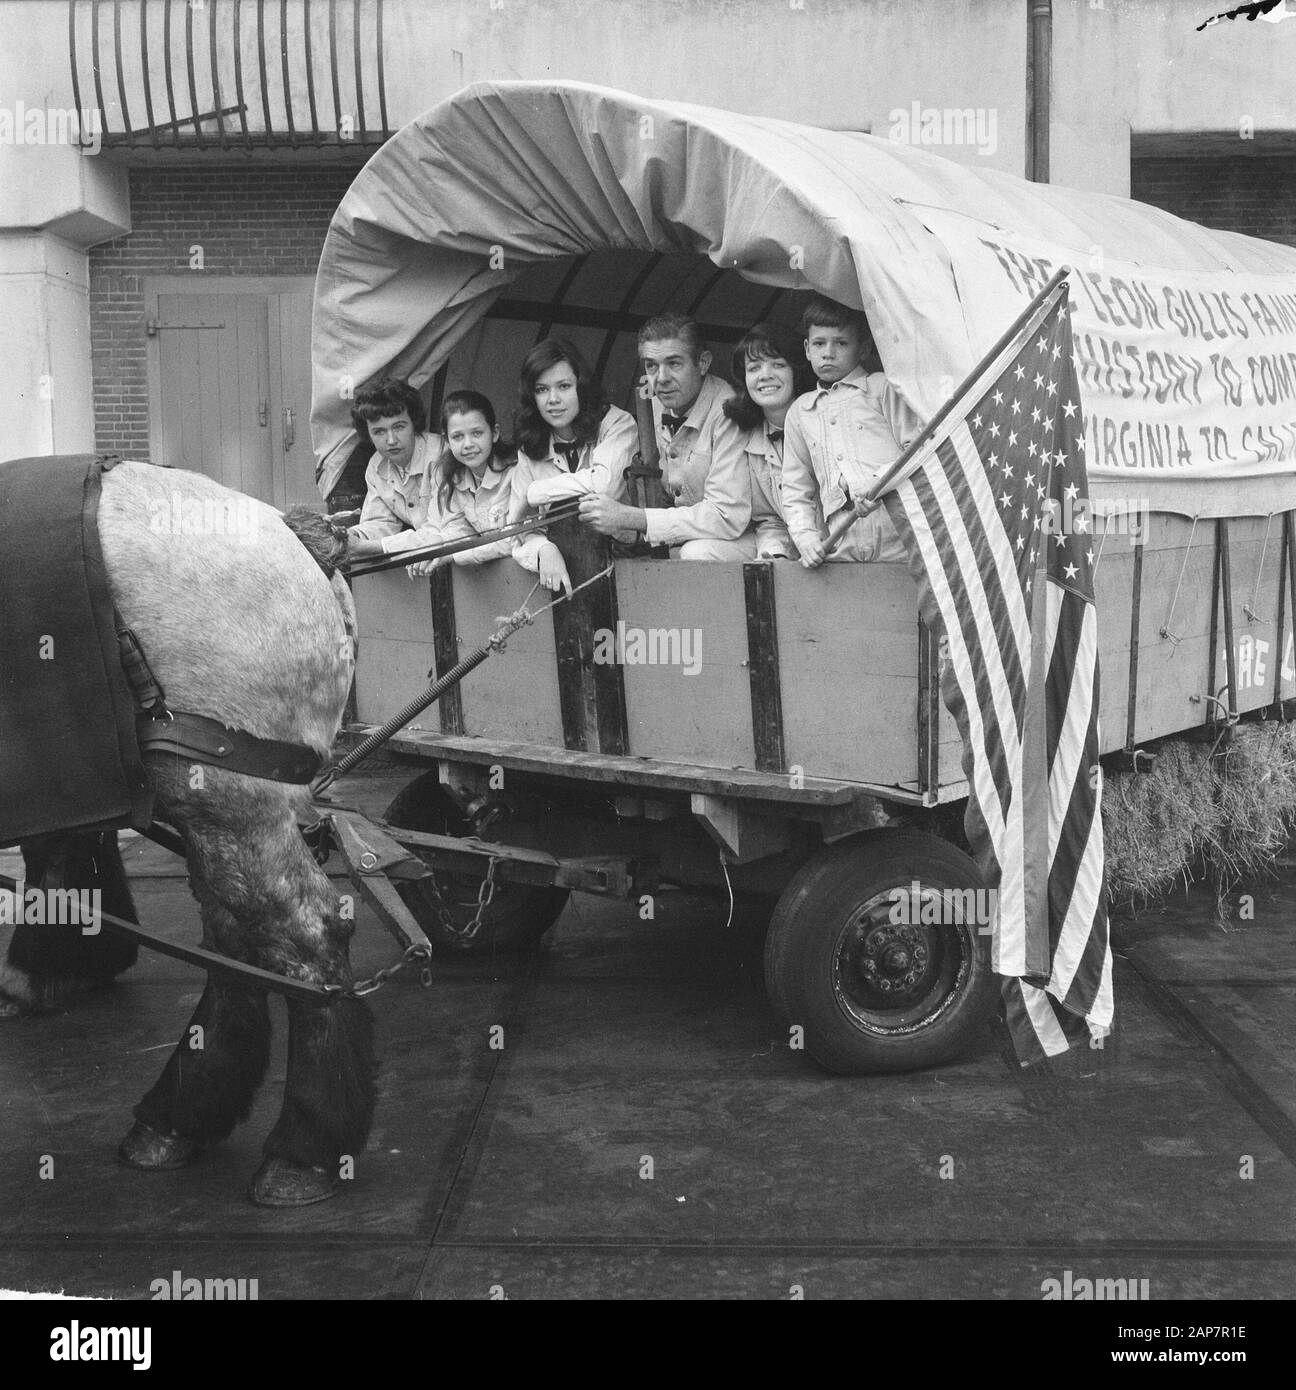 The family Gillis from America with wagon in the Netherlands, family Gillis Annotation: Leon Hilton Gillis (1920-2010) American traveler. In 1961-62, Leon Gillis of Virginia led his family of eight on a coast-to-coast covered wagon journey, in the Last Wagon West. In 1963-64, the Gillis family took their wagon to Europe, traveling from France, to a Dutch visit with Freddy Heineken, to Moscow, living by dint of their wits and the generosity of strangers. (source: Wikipedia) Date: 28 February 1964 Location: Amsterdam Keywords: families, covered carts Stock Photo